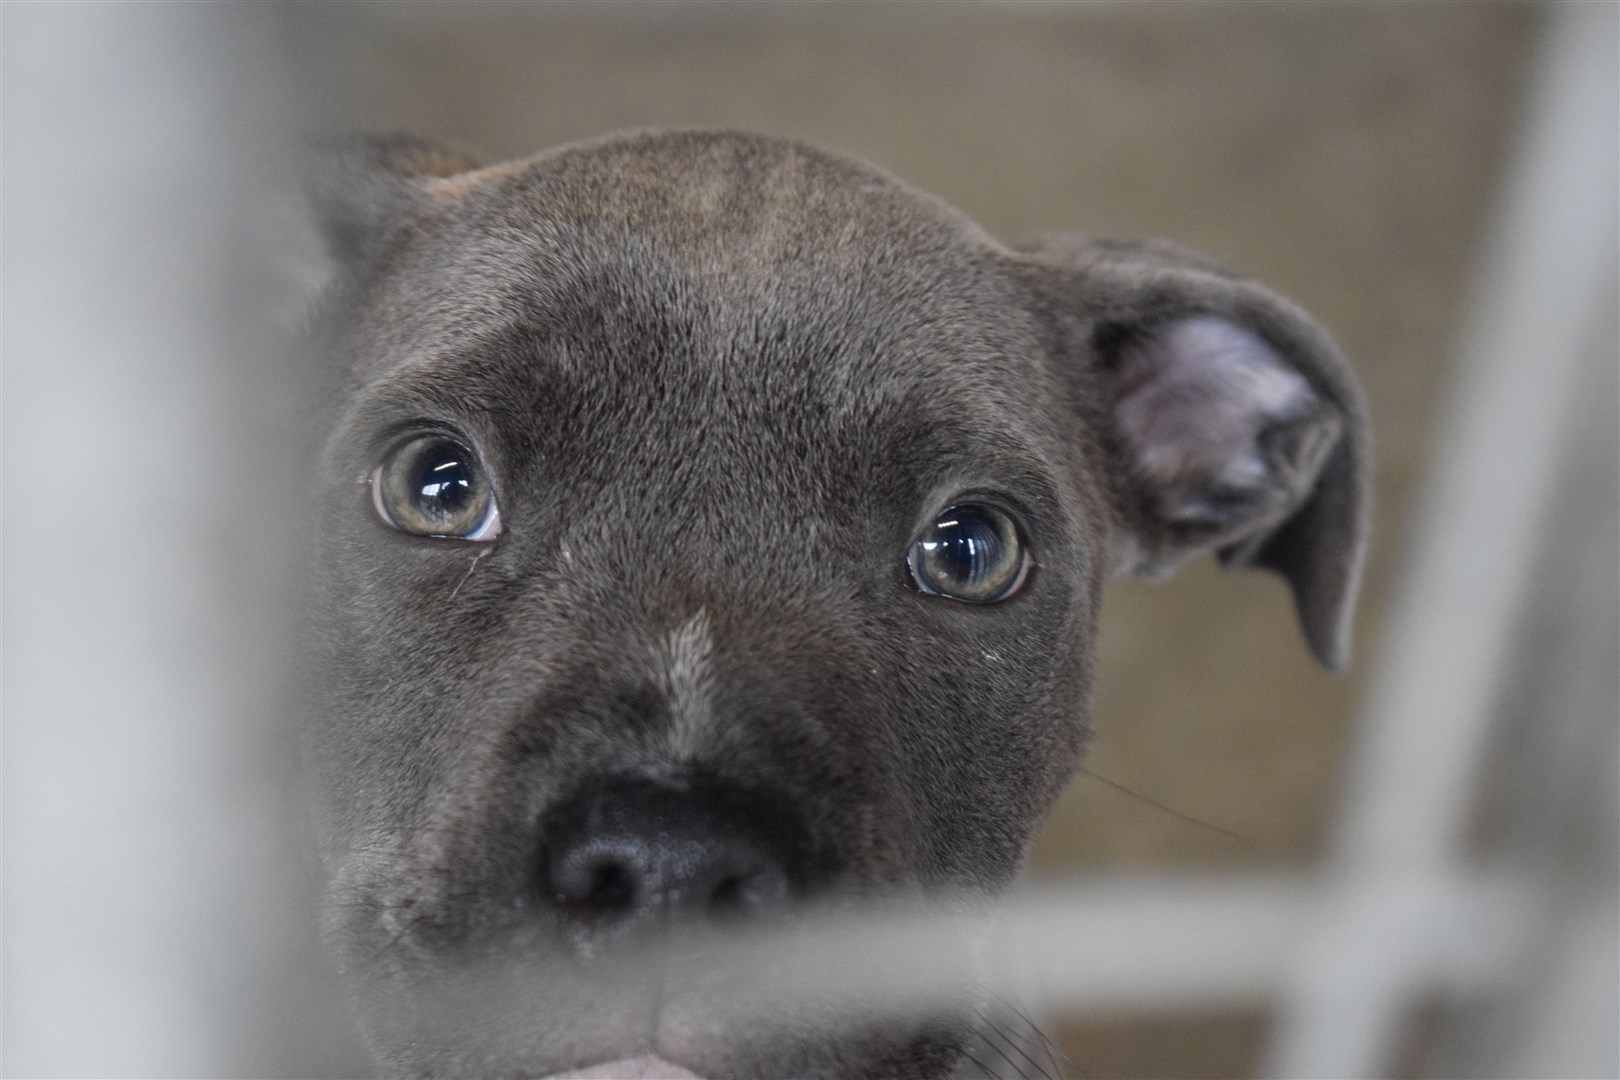 More than 60 dogs were rescued from a suspected puppy farm in October last year.